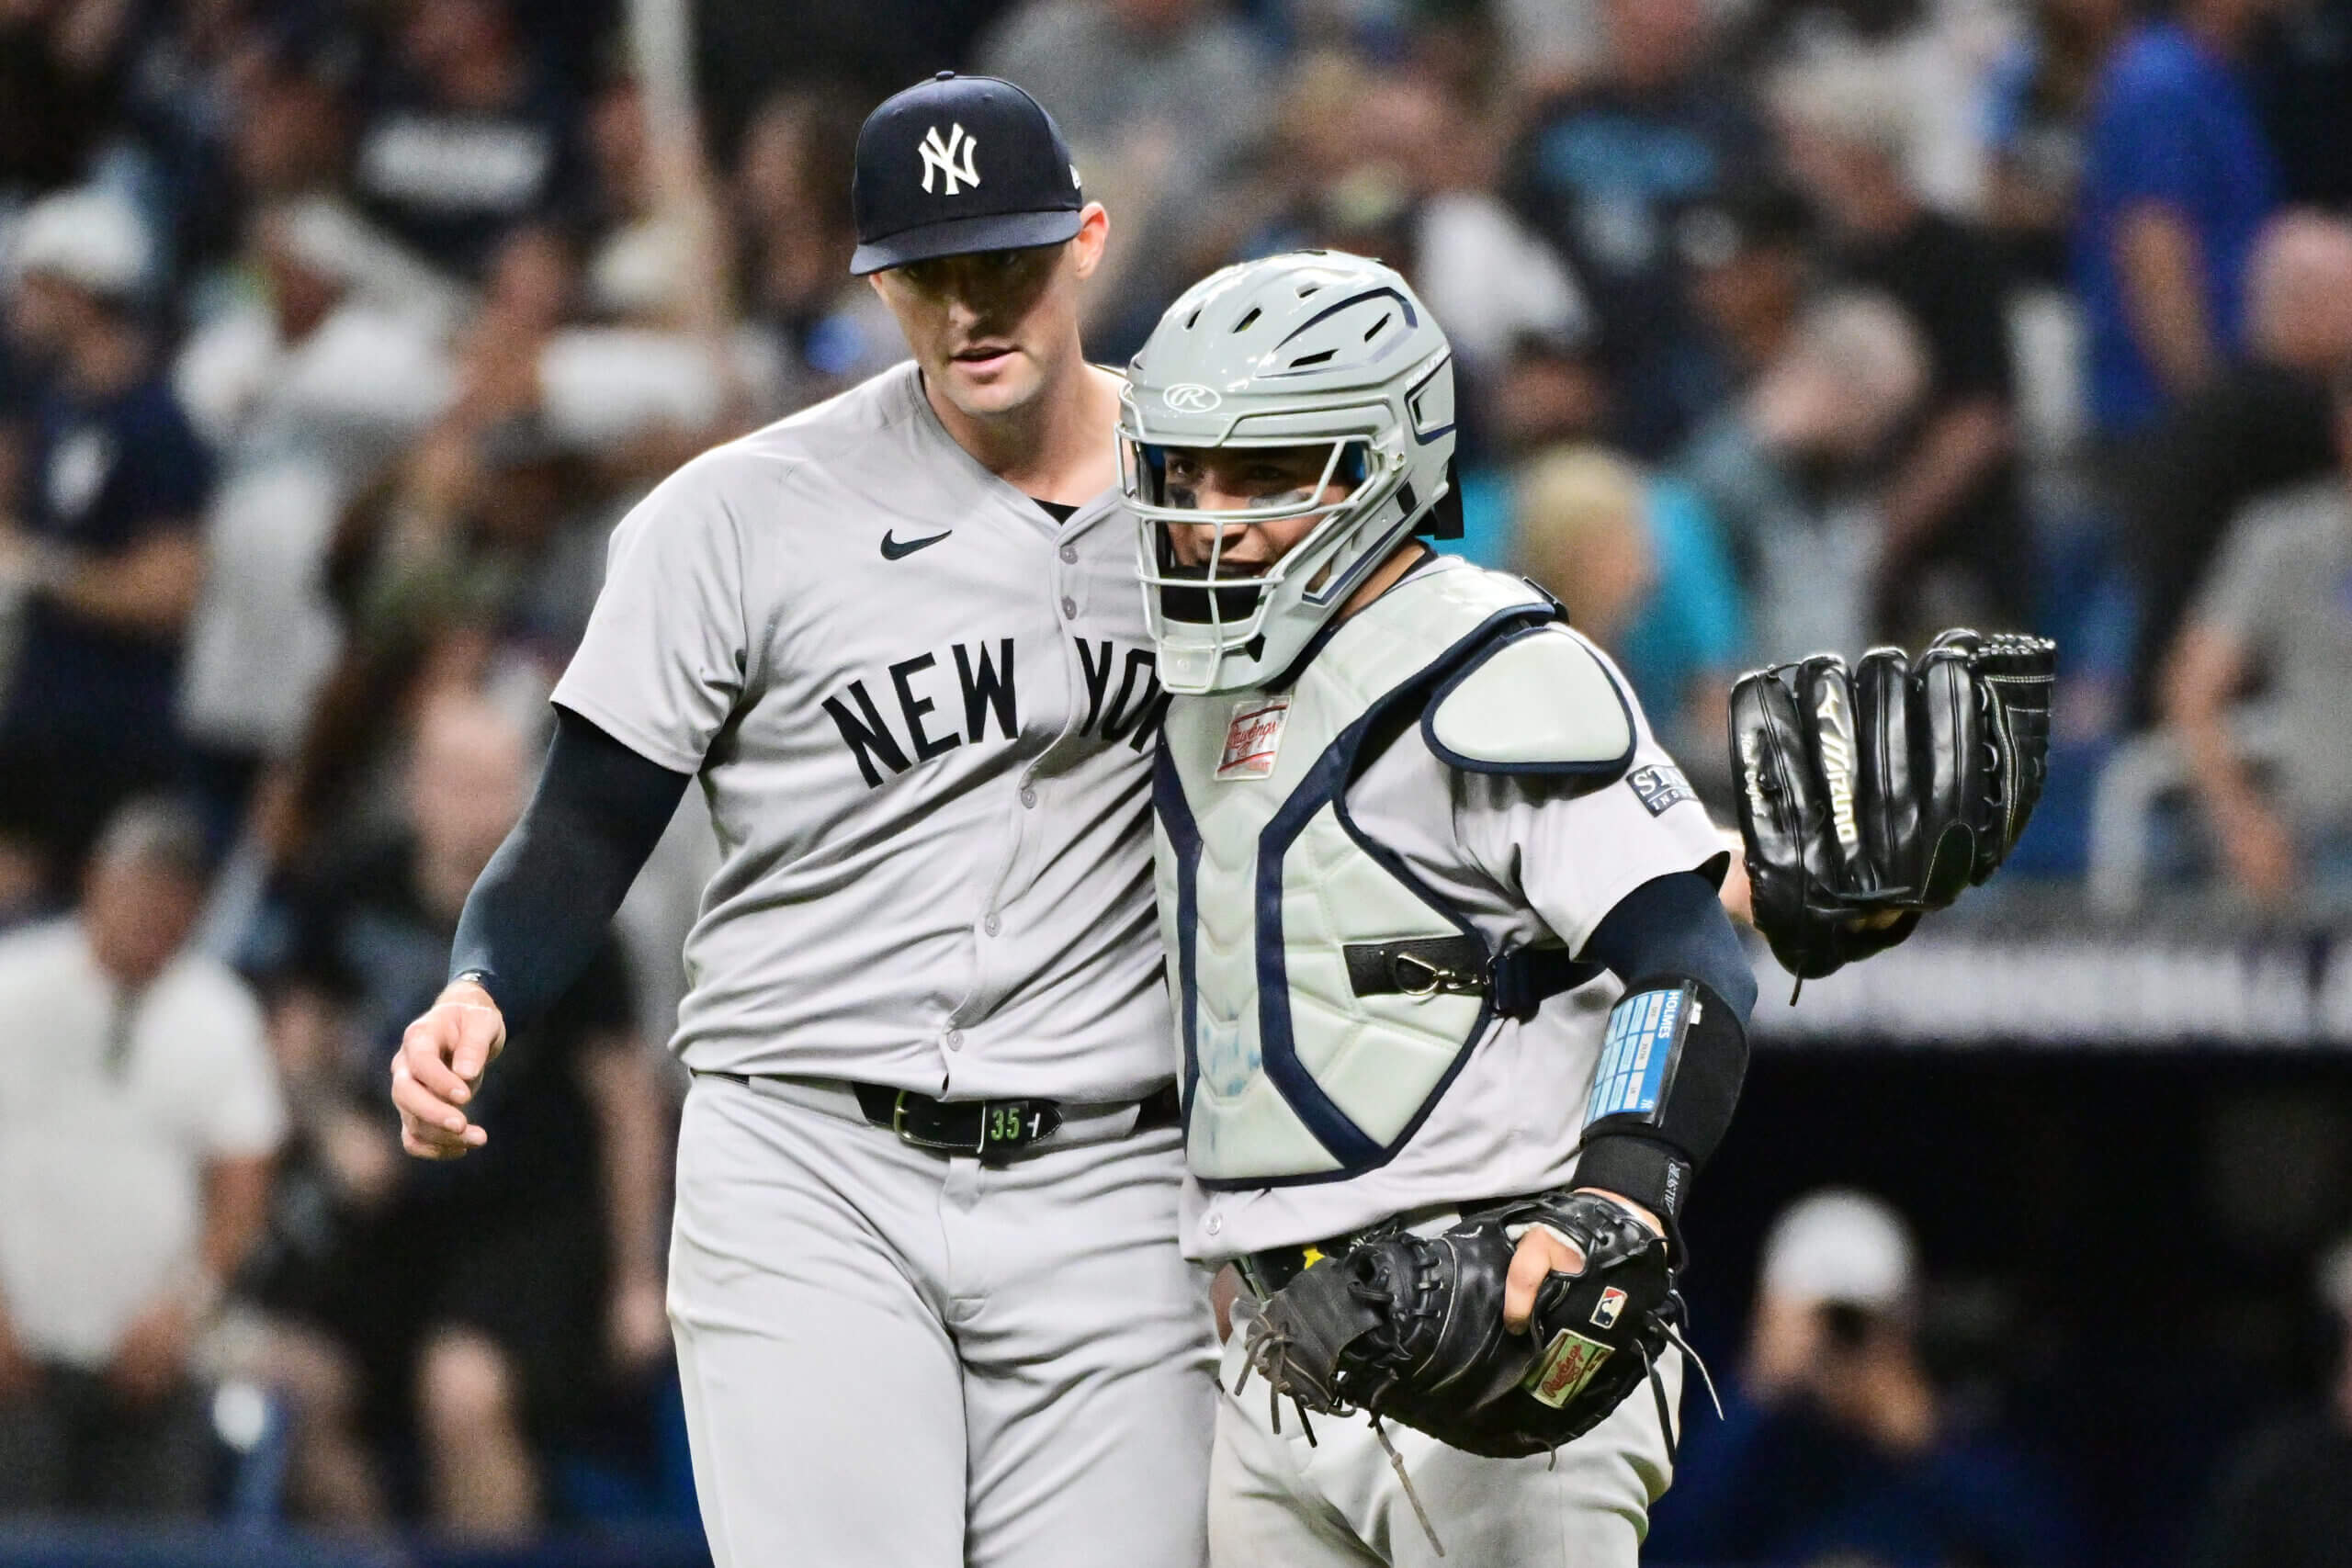  Yankees’ Clay Holmes escapes disaster; Ron Marinaccio ‘upset’ after latest demotion 